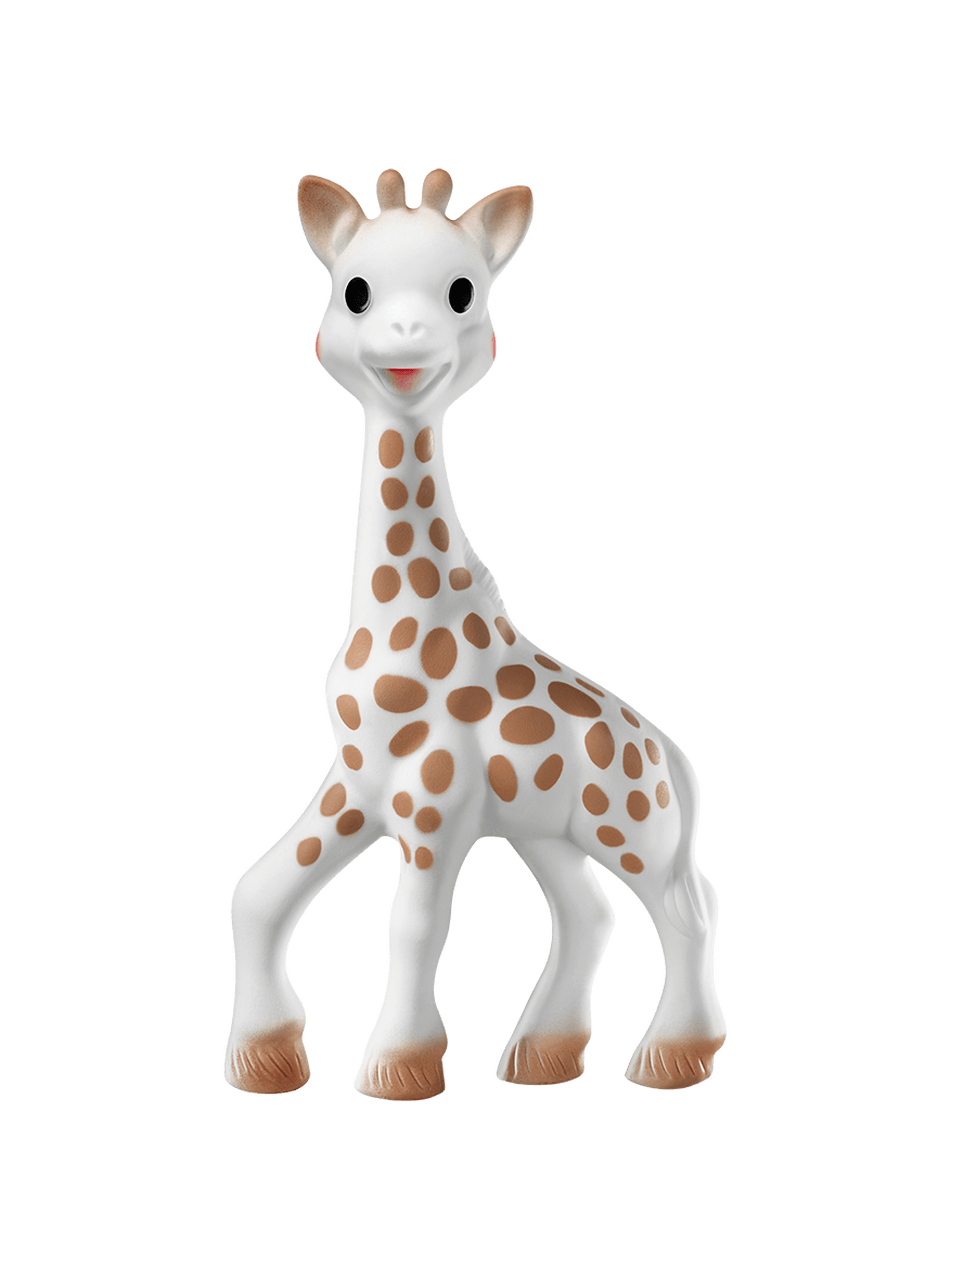 Sophie La Girafe The Girafe Natural Rubber Teether Toy - ANB Baby -$20 - $50